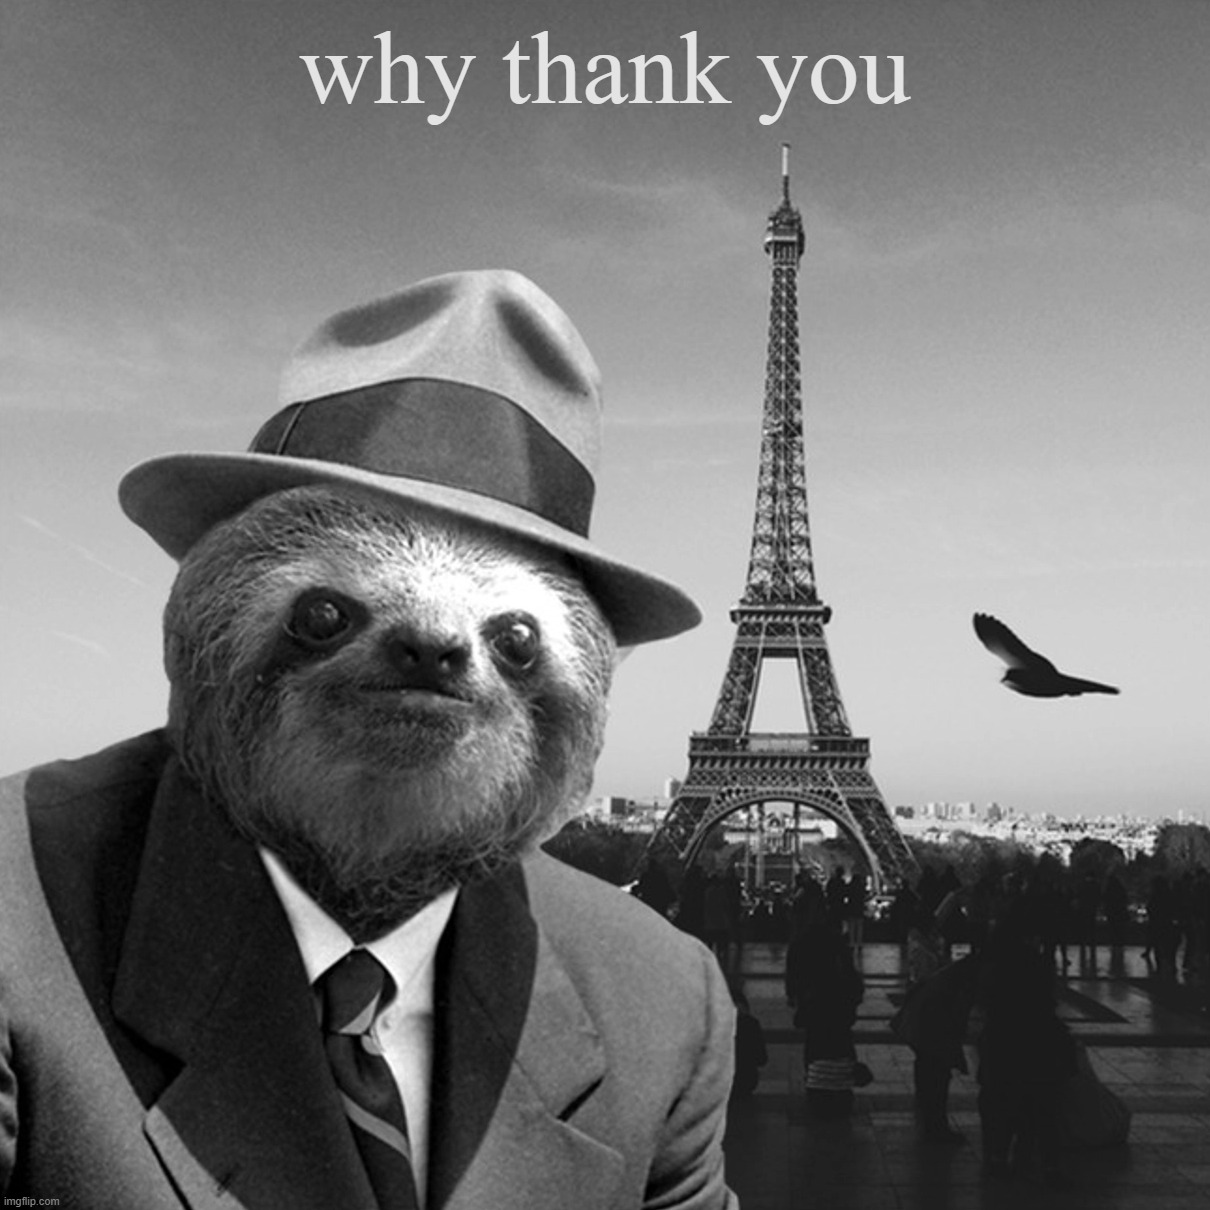 v rare self-cringe | why thank you | image tagged in sloth gentleman | made w/ Imgflip meme maker